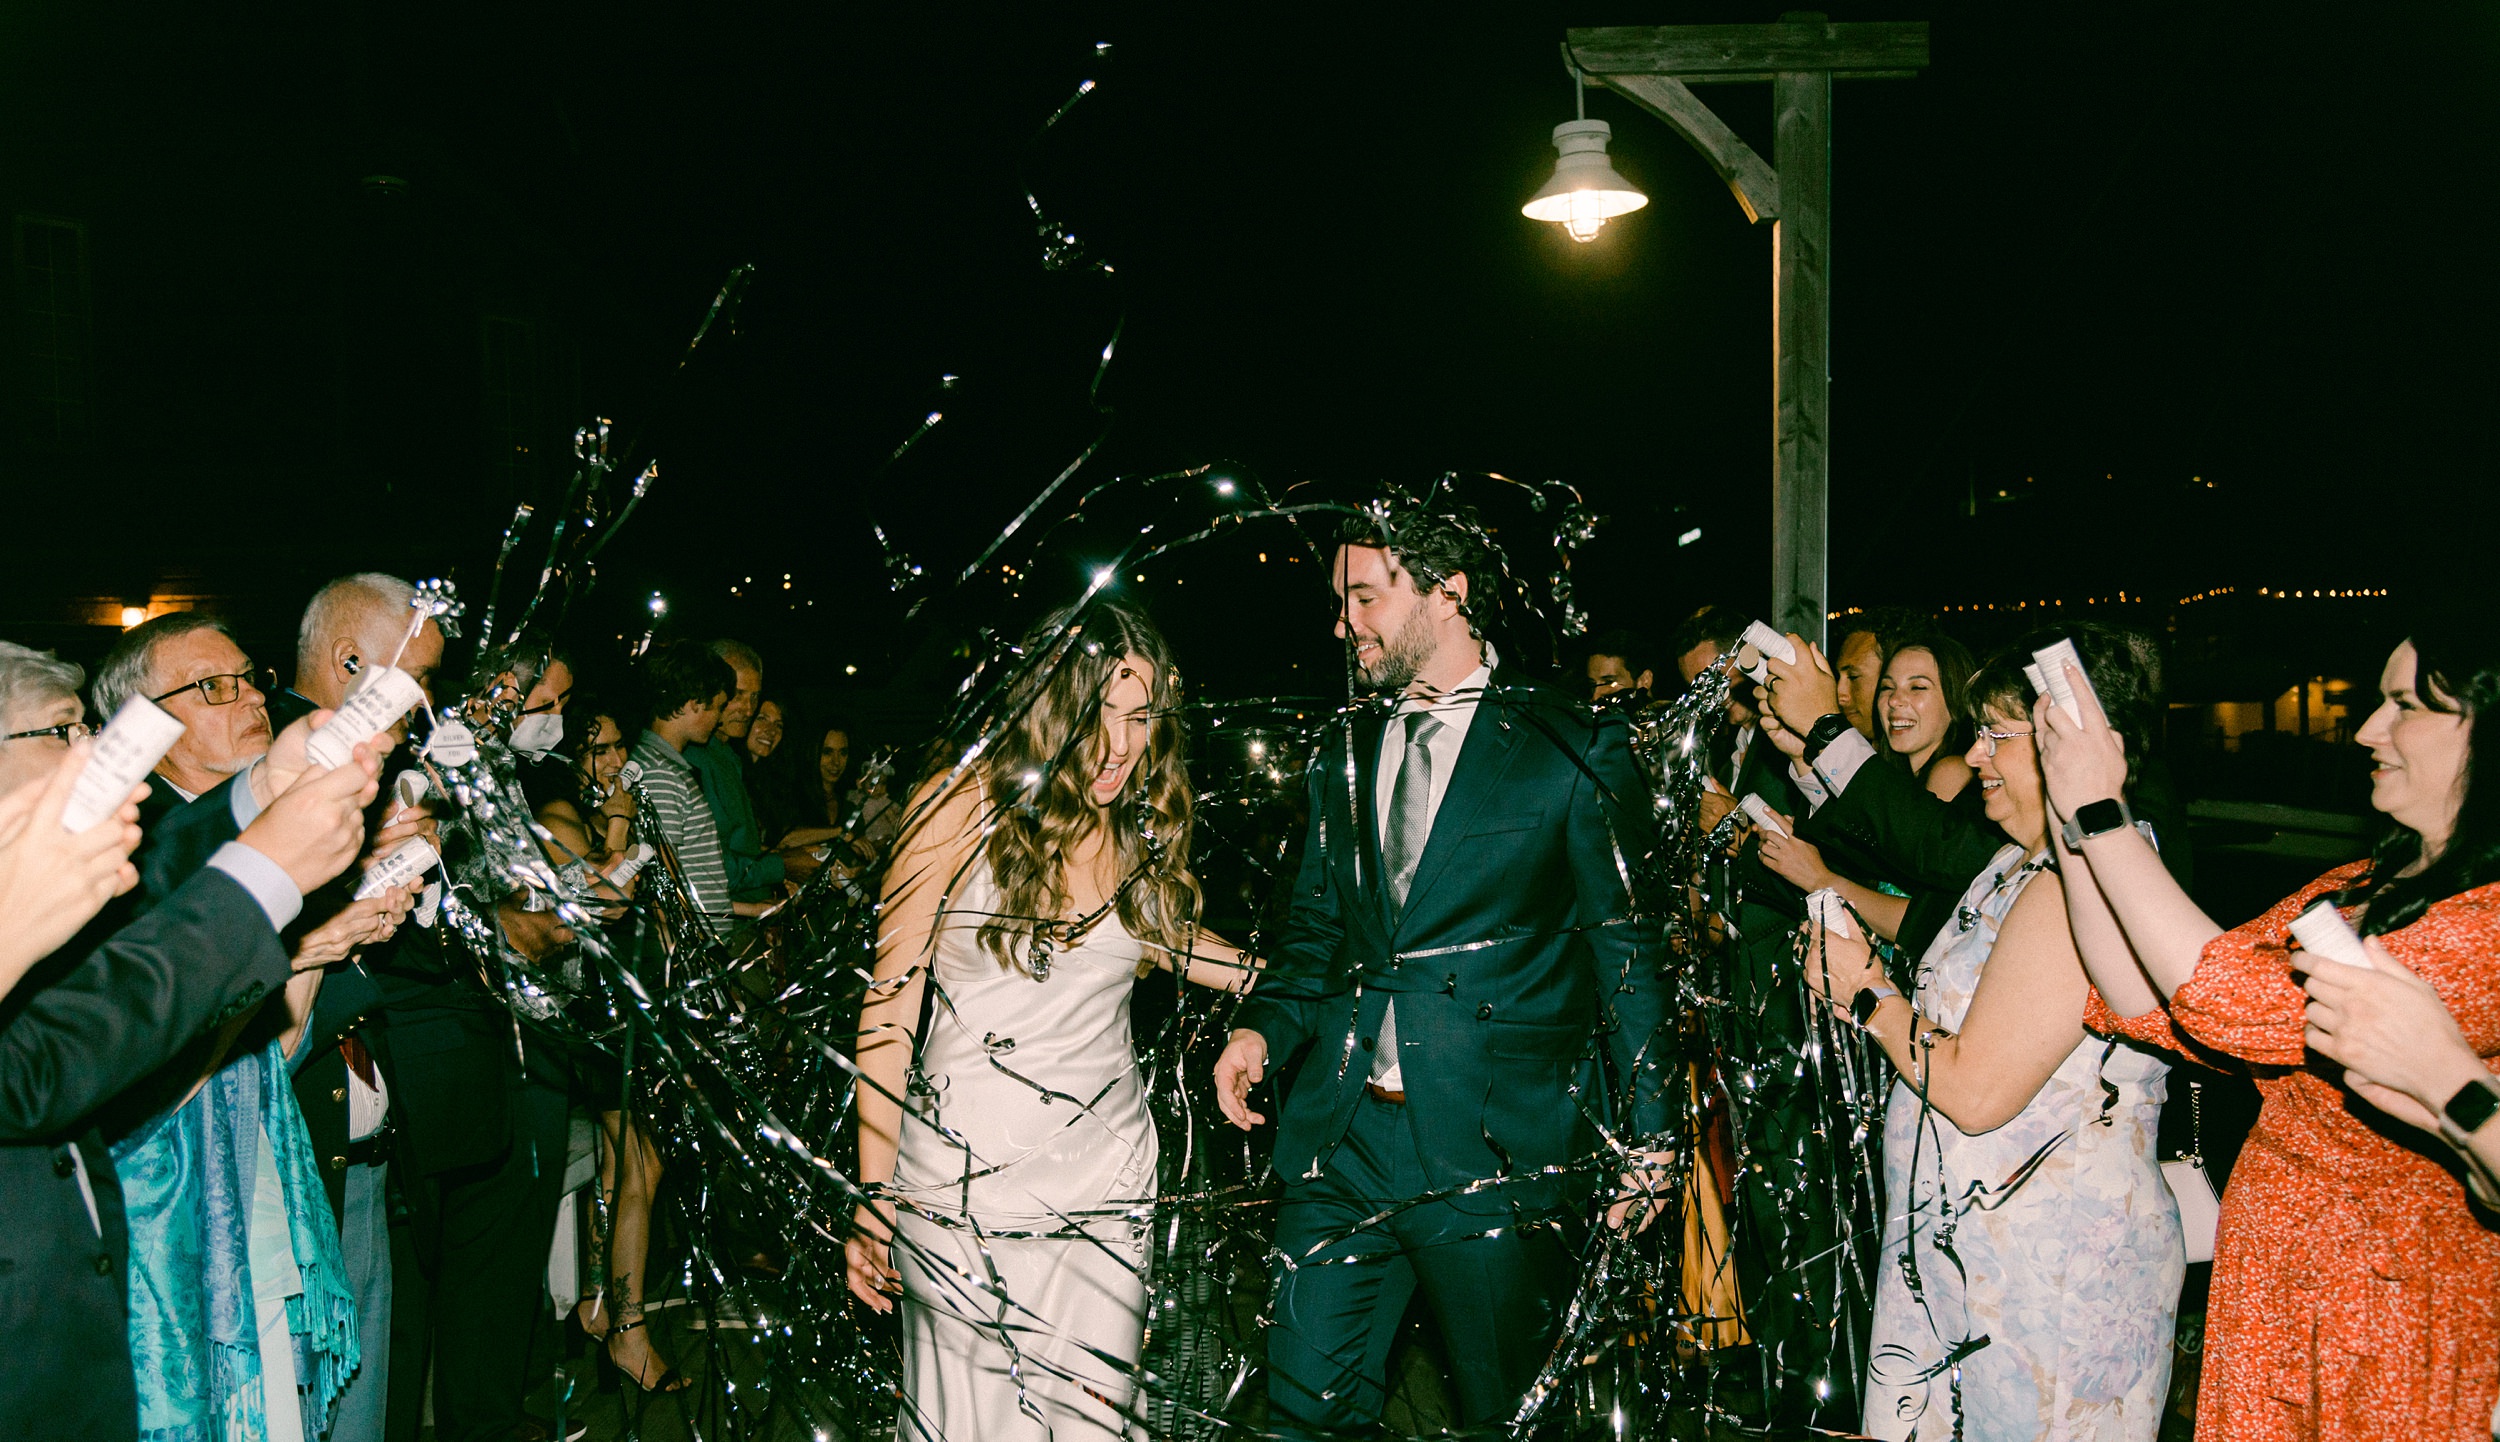 Fine Art Weddings in Seattle Washington. The Center for Wooden Boats, Bride and Groom at their wedding exit, walking through their guests who have confetti streams popping across the image.